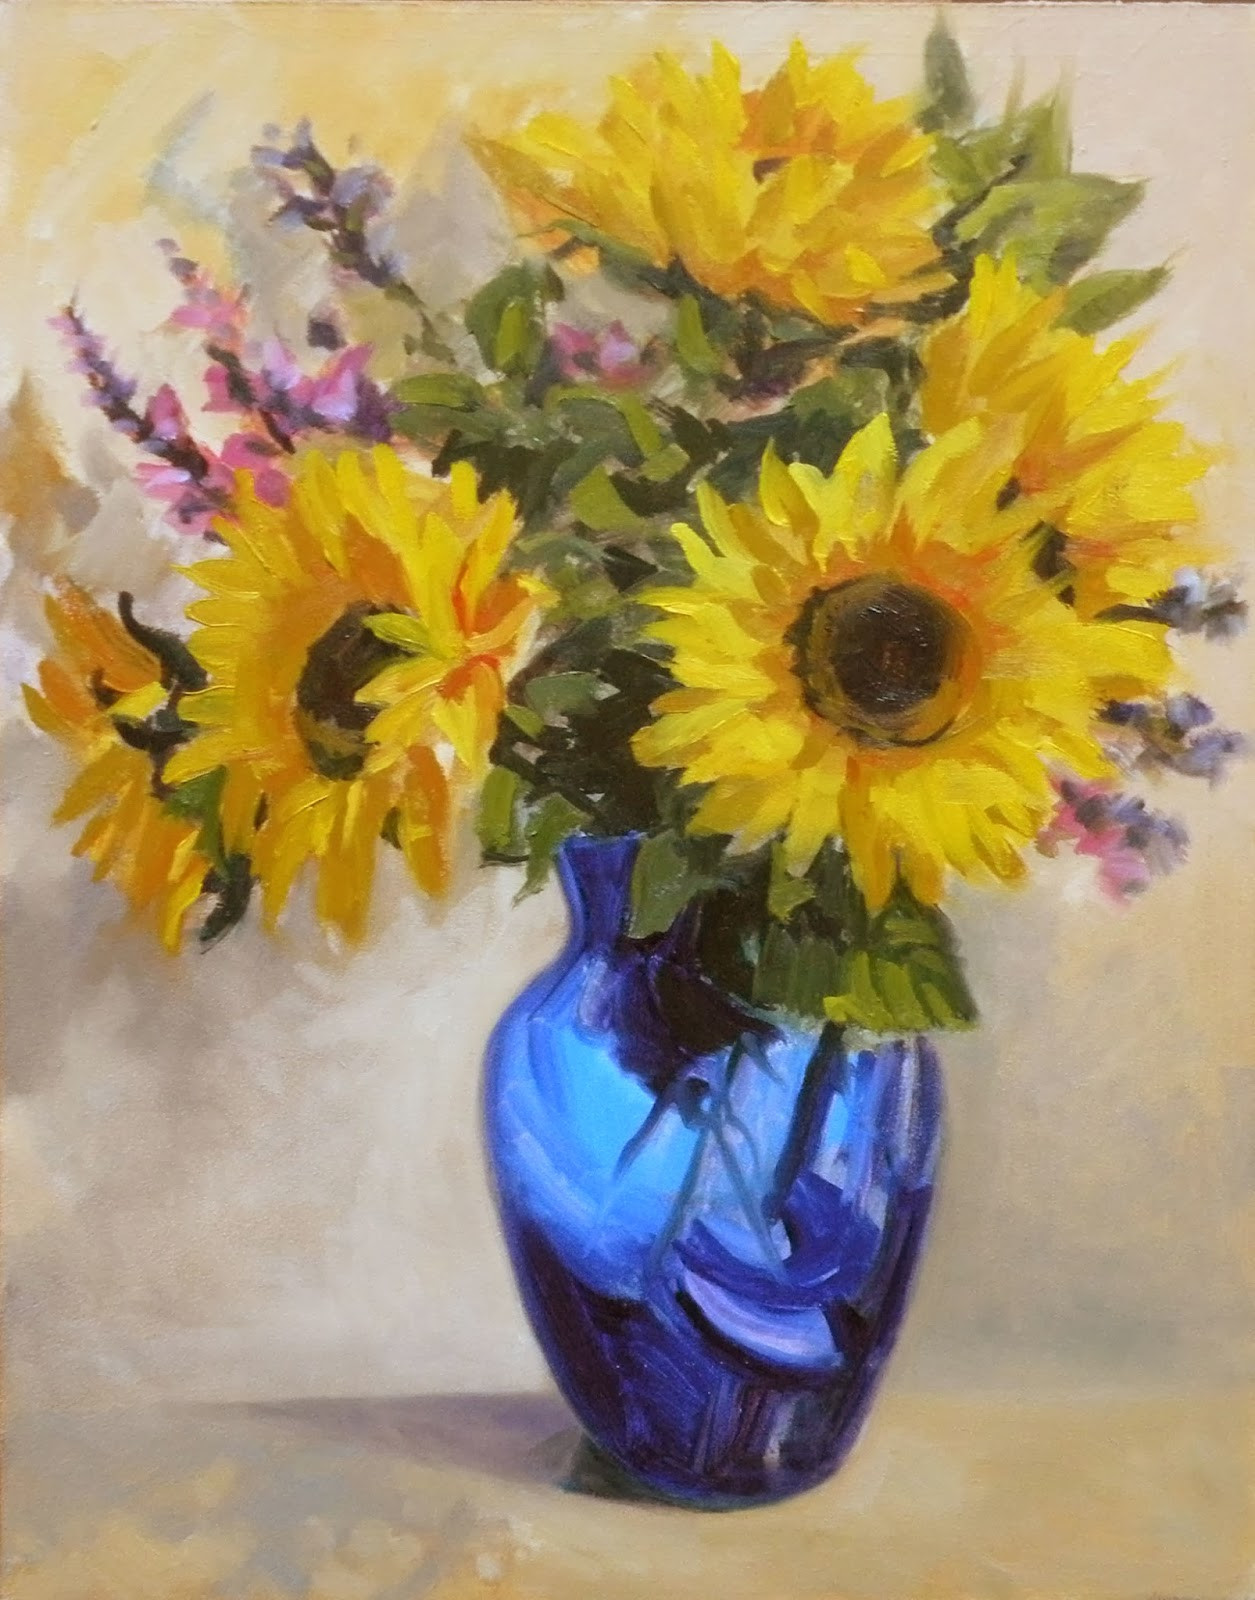 18 Trendy Vase Of Sunflowers 2024 free download vase of sunflowers of 24 best sunflowers in a vase images on pinterest in 2018 regarding 24 best sunflowers in a vase images on pinterest in 2018 sunflowers sunflower art and draw